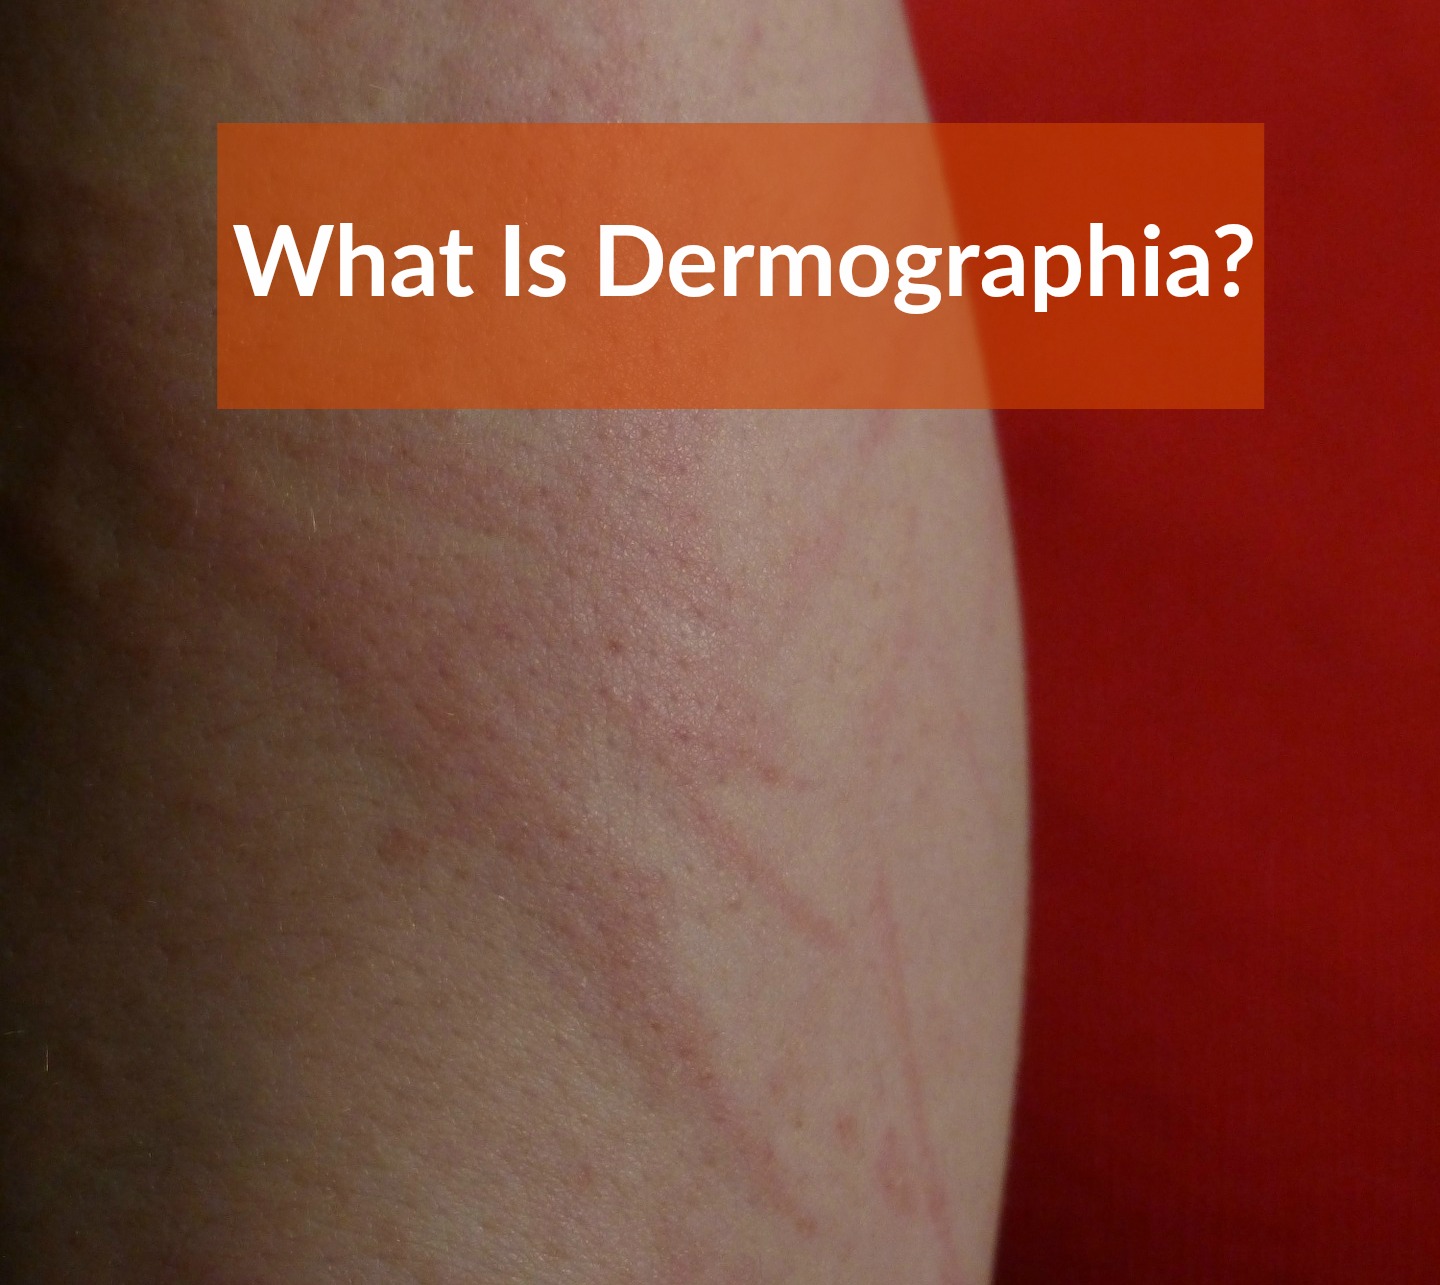 what is Dermographia